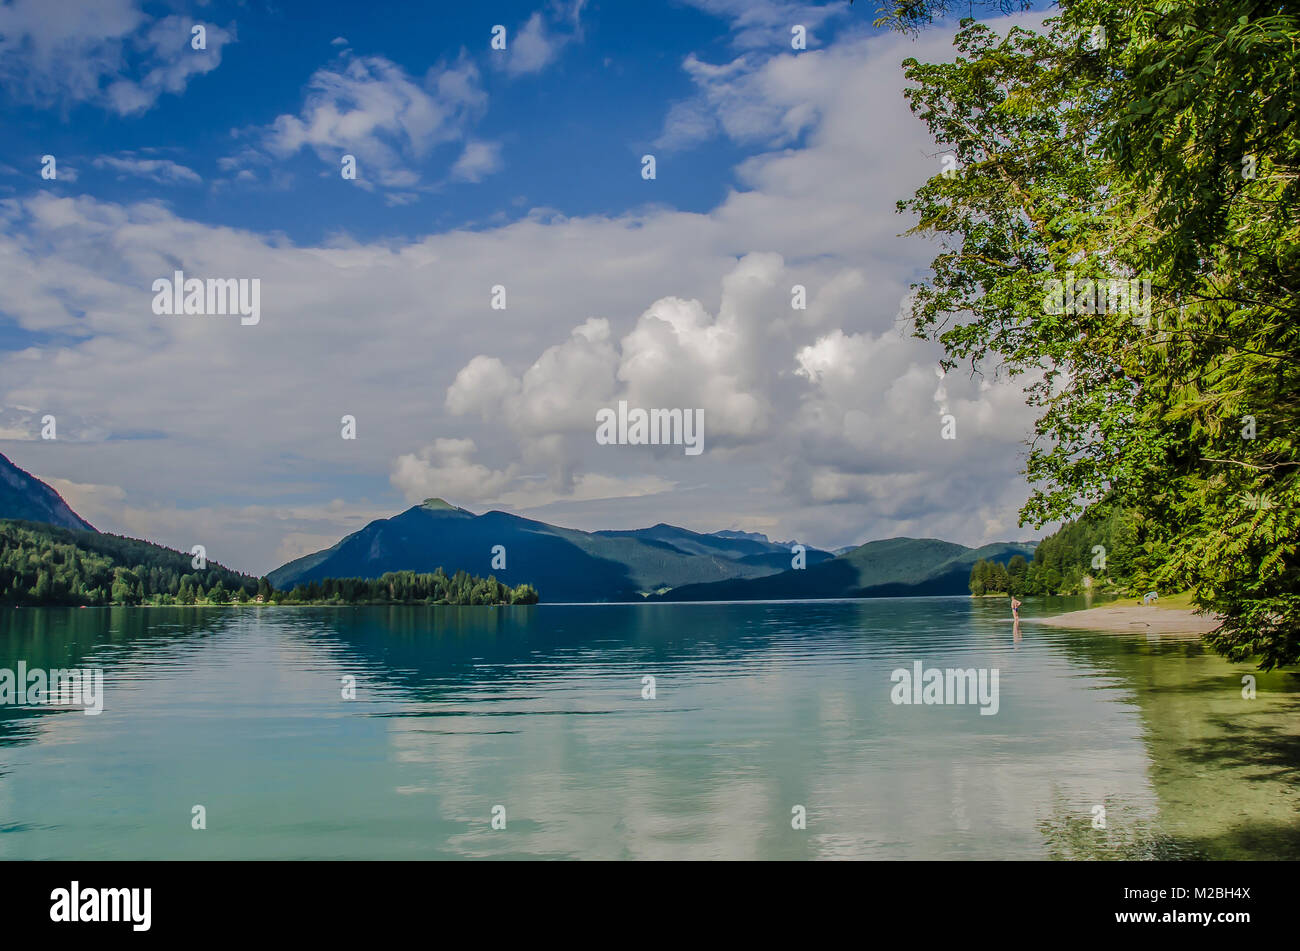 Walchensee or Lake Walchen is a beautiful lake nestled in between the peaks of the Heimgarten and the Herzogstand mountains. Stock Photo